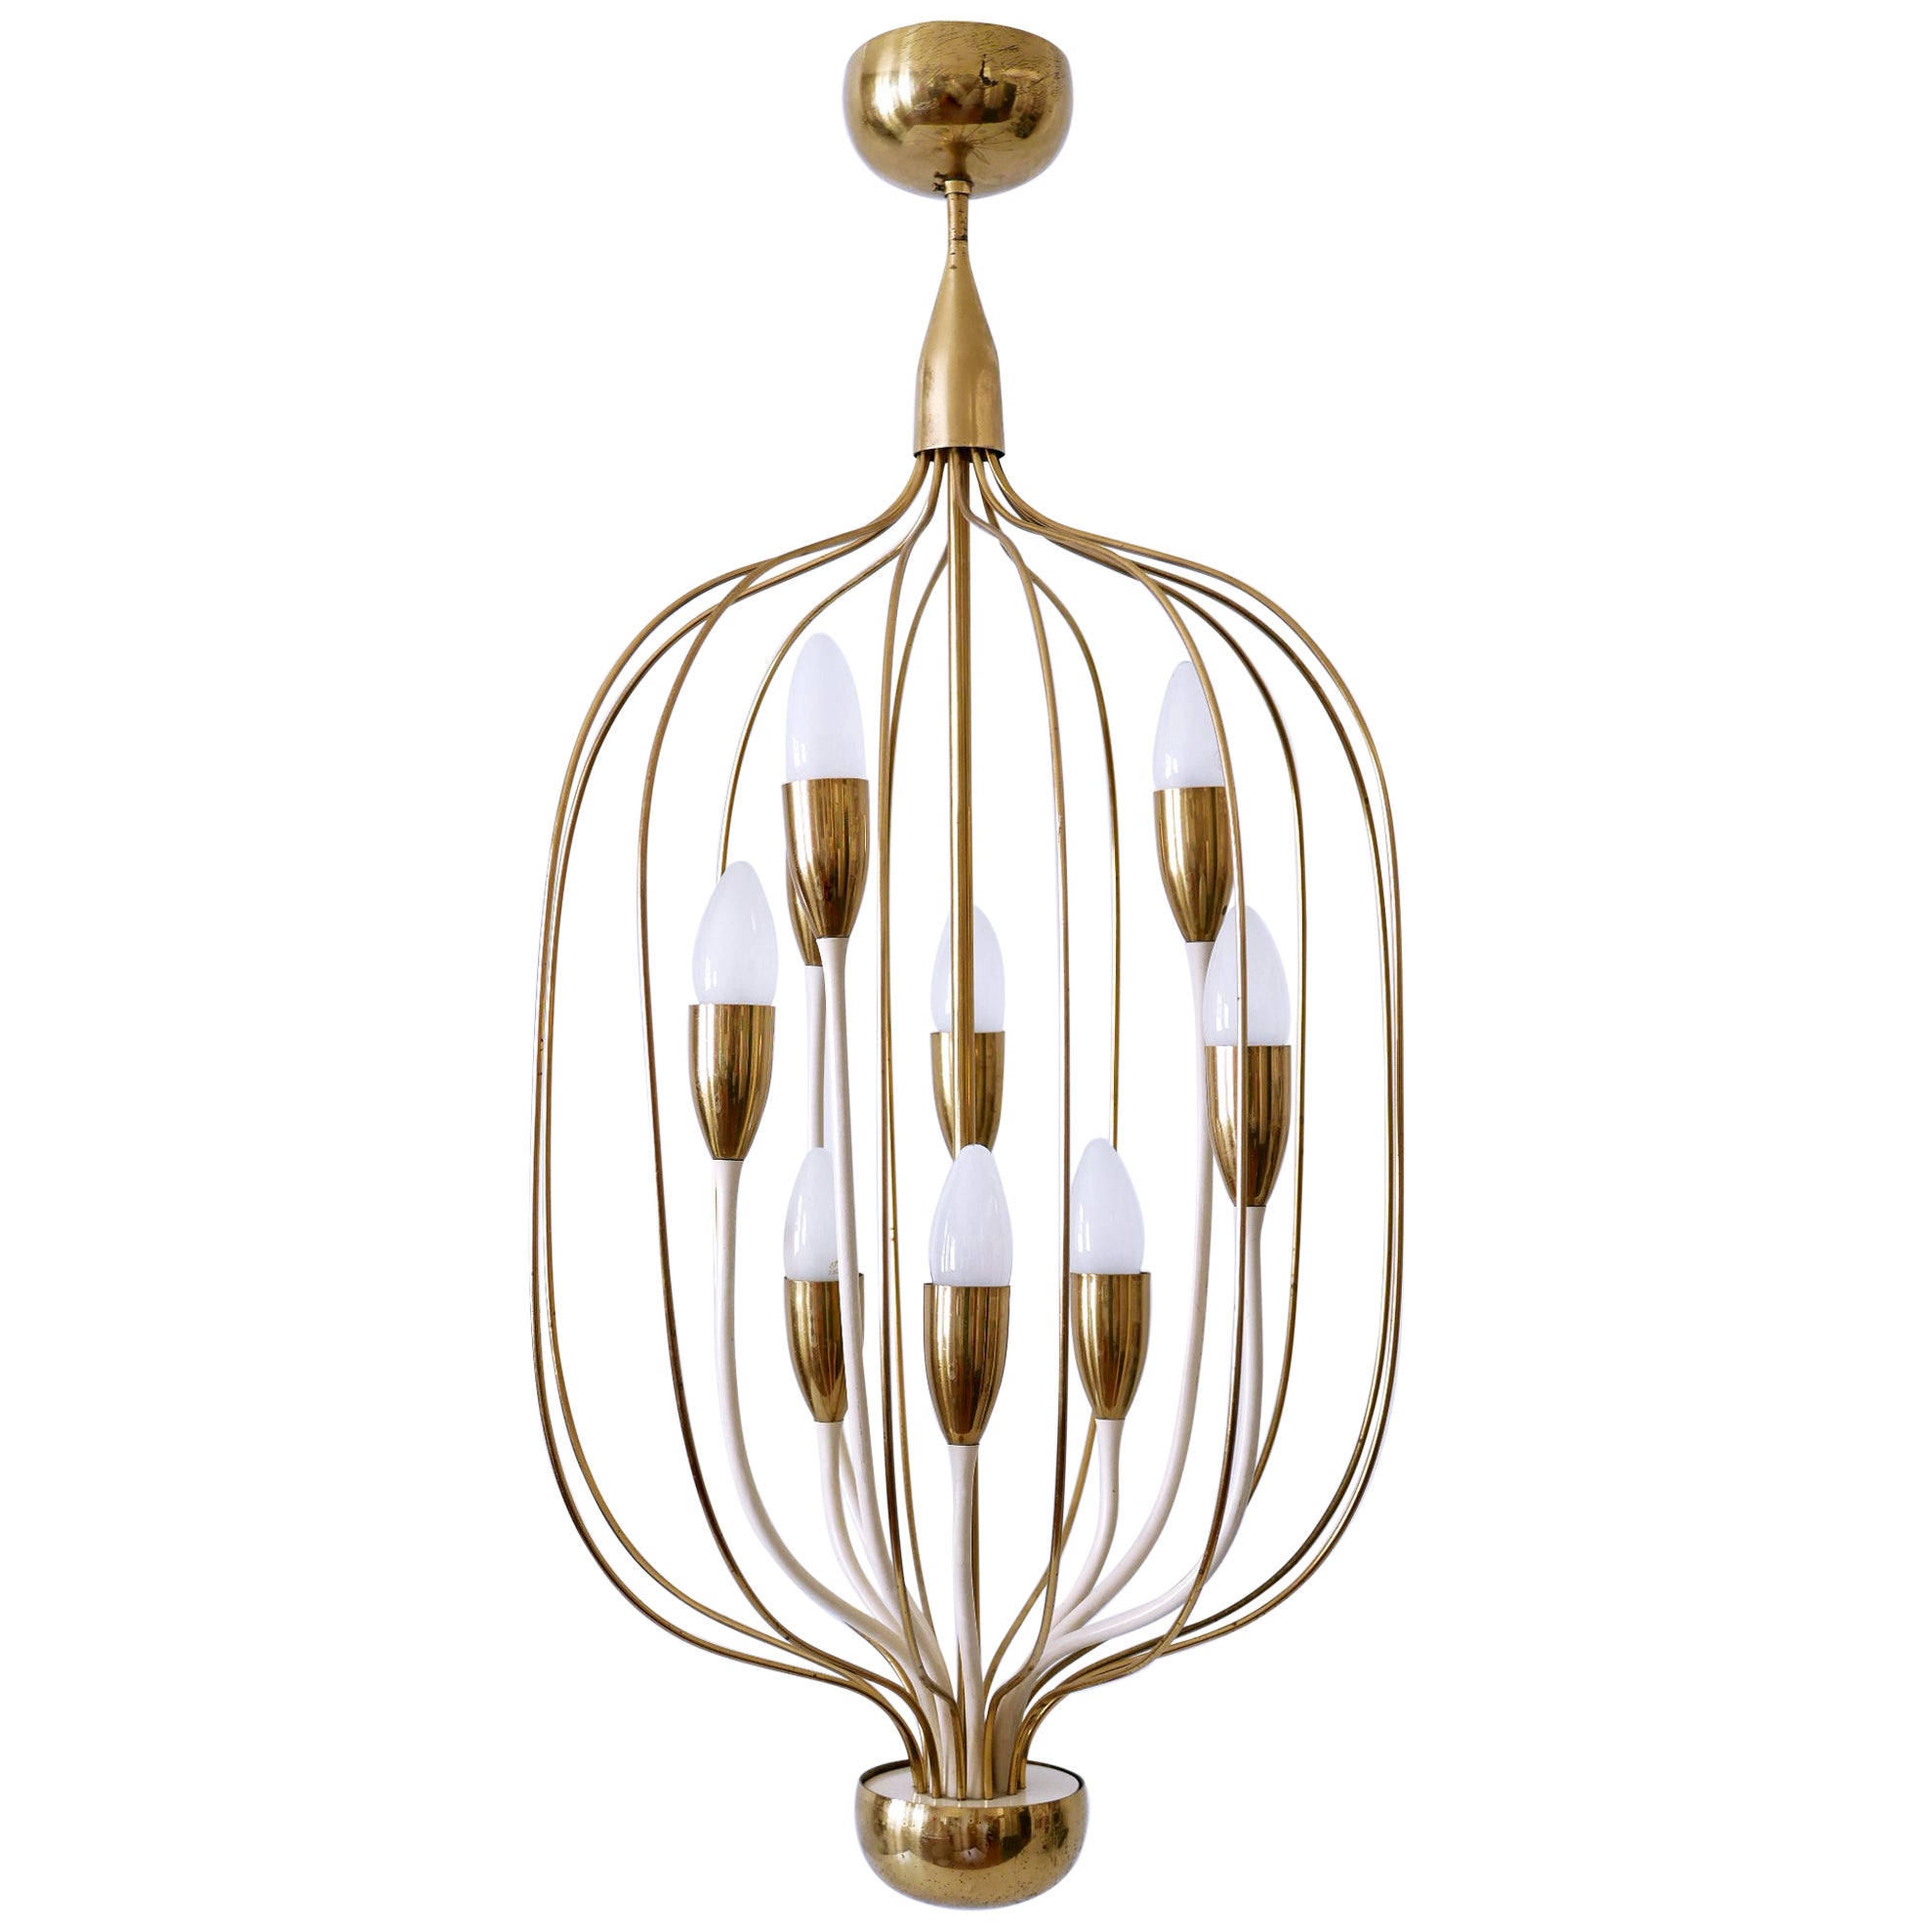 Exceptional Mid-Century Modern Nine-Flamed Chandelier or Pendant Lamp 1950s For Sale